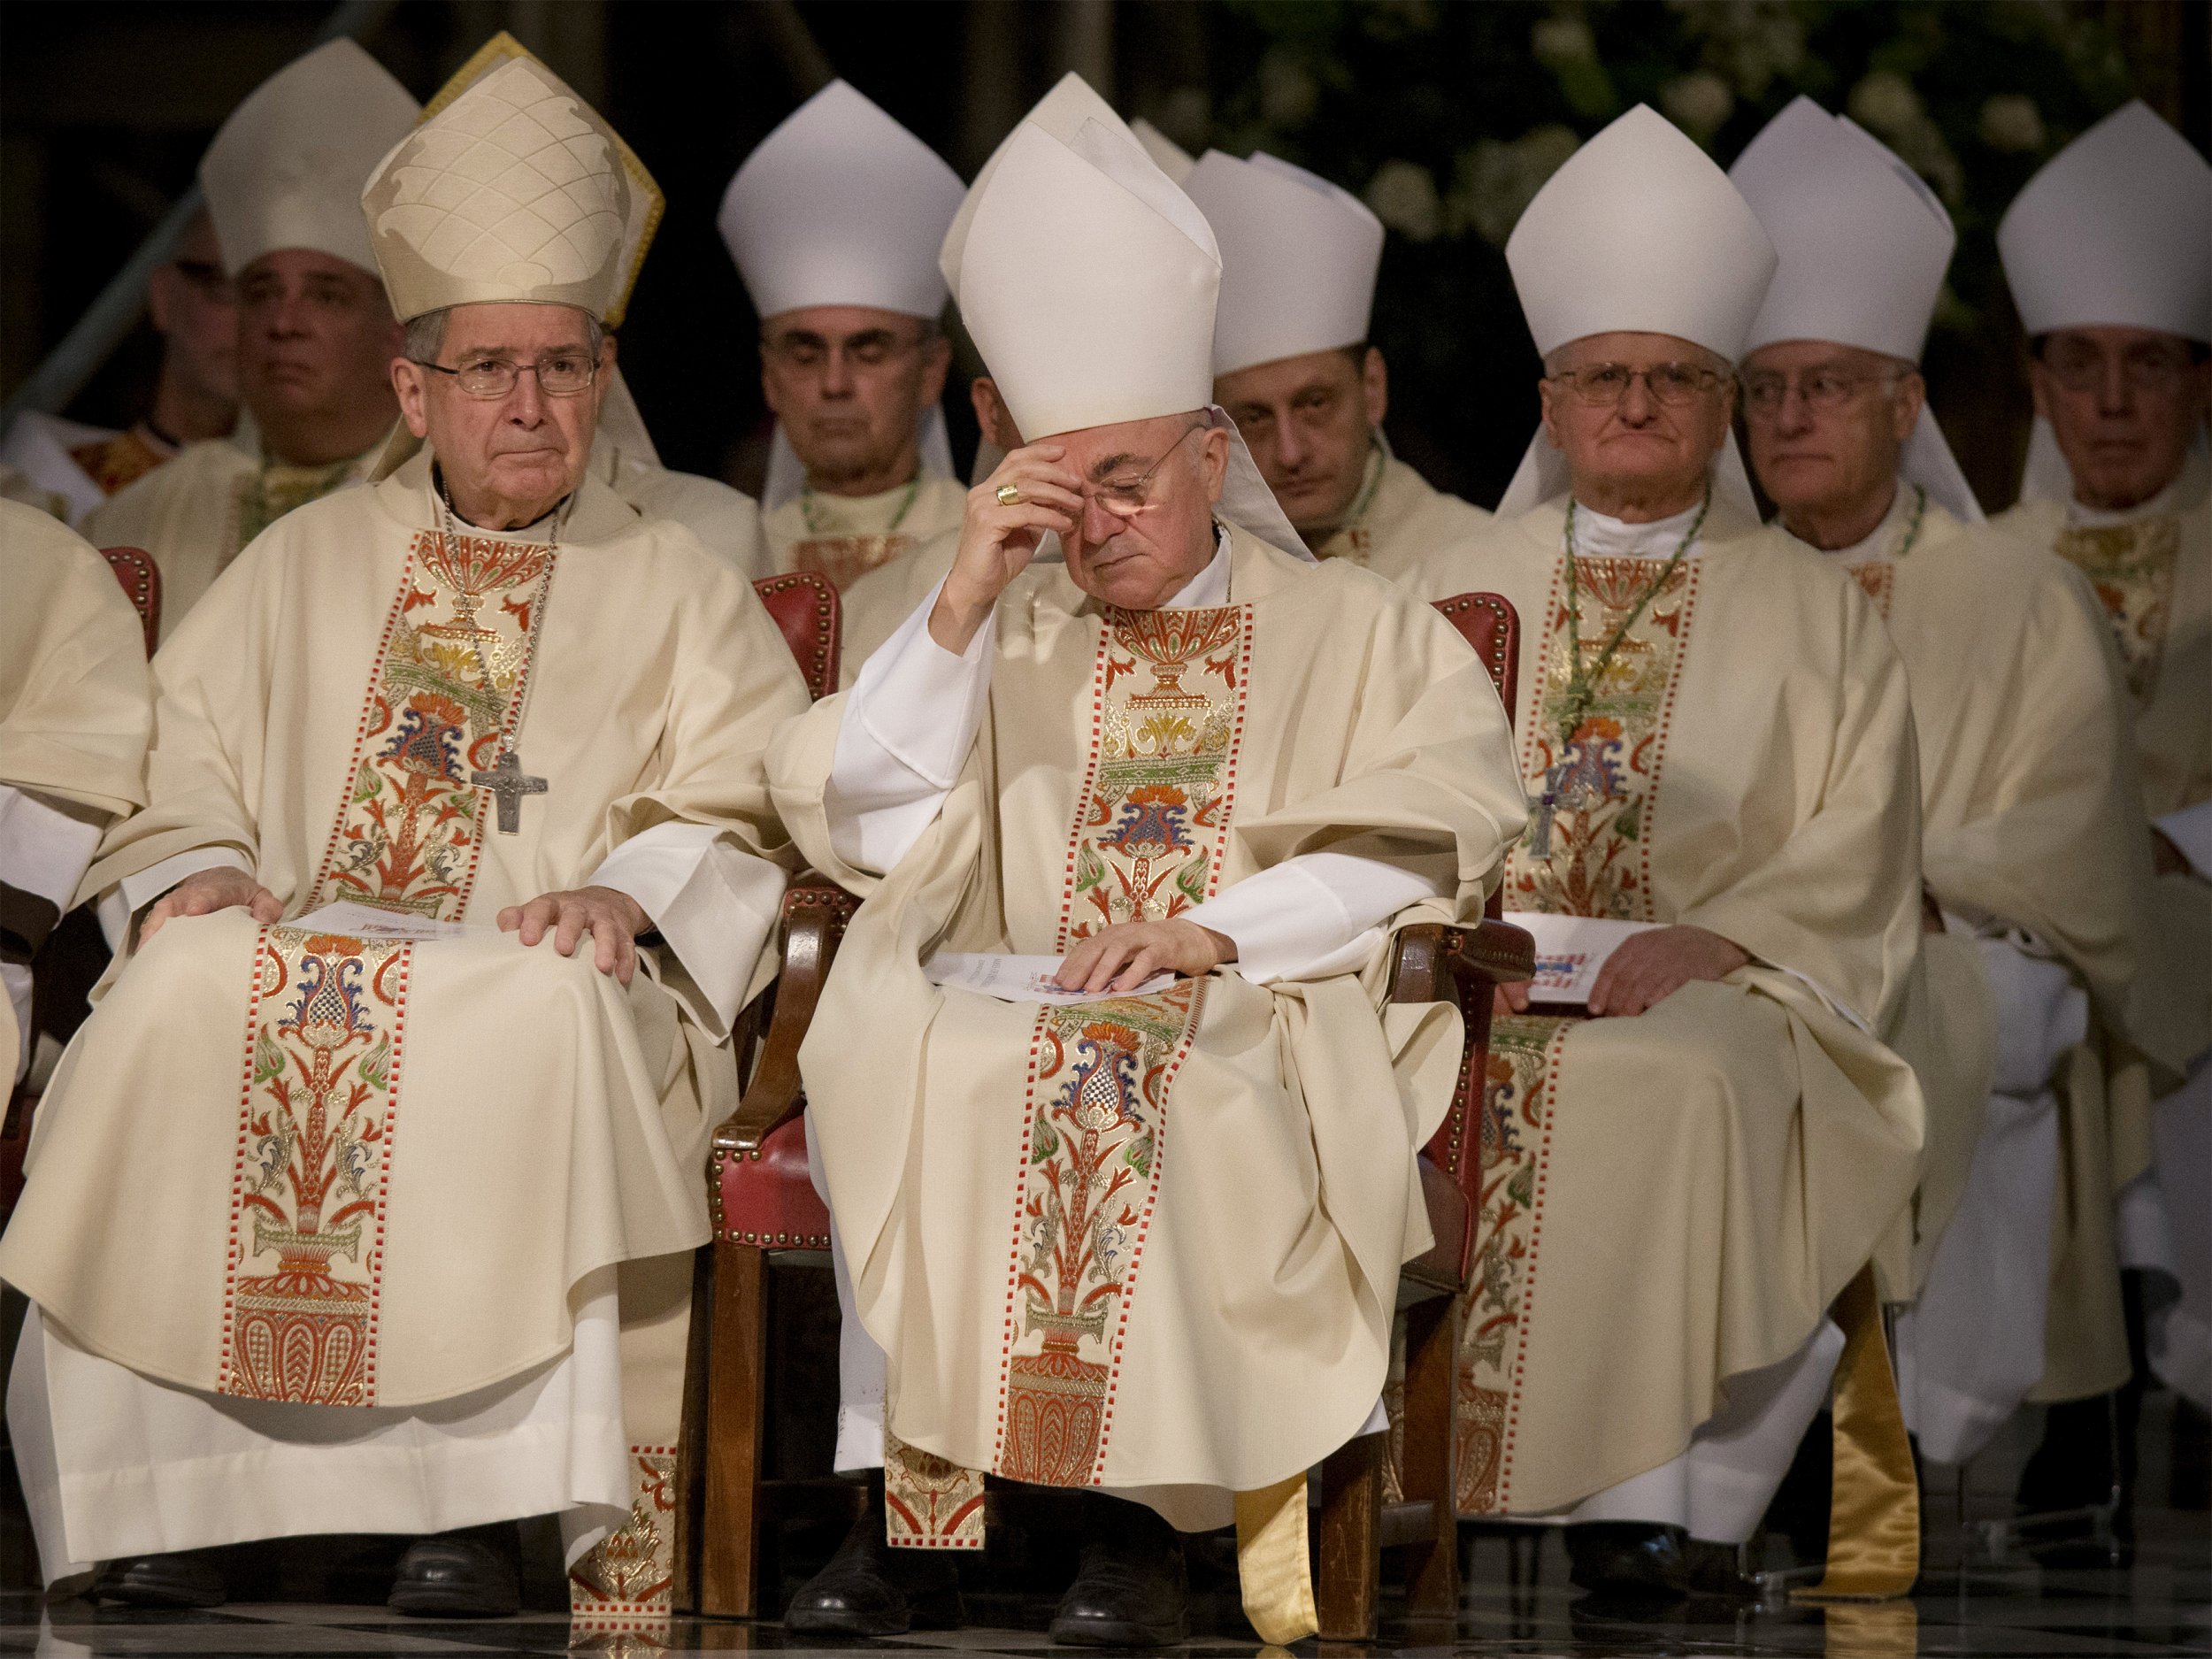 “I saw many good pious Bishops but … weak and…